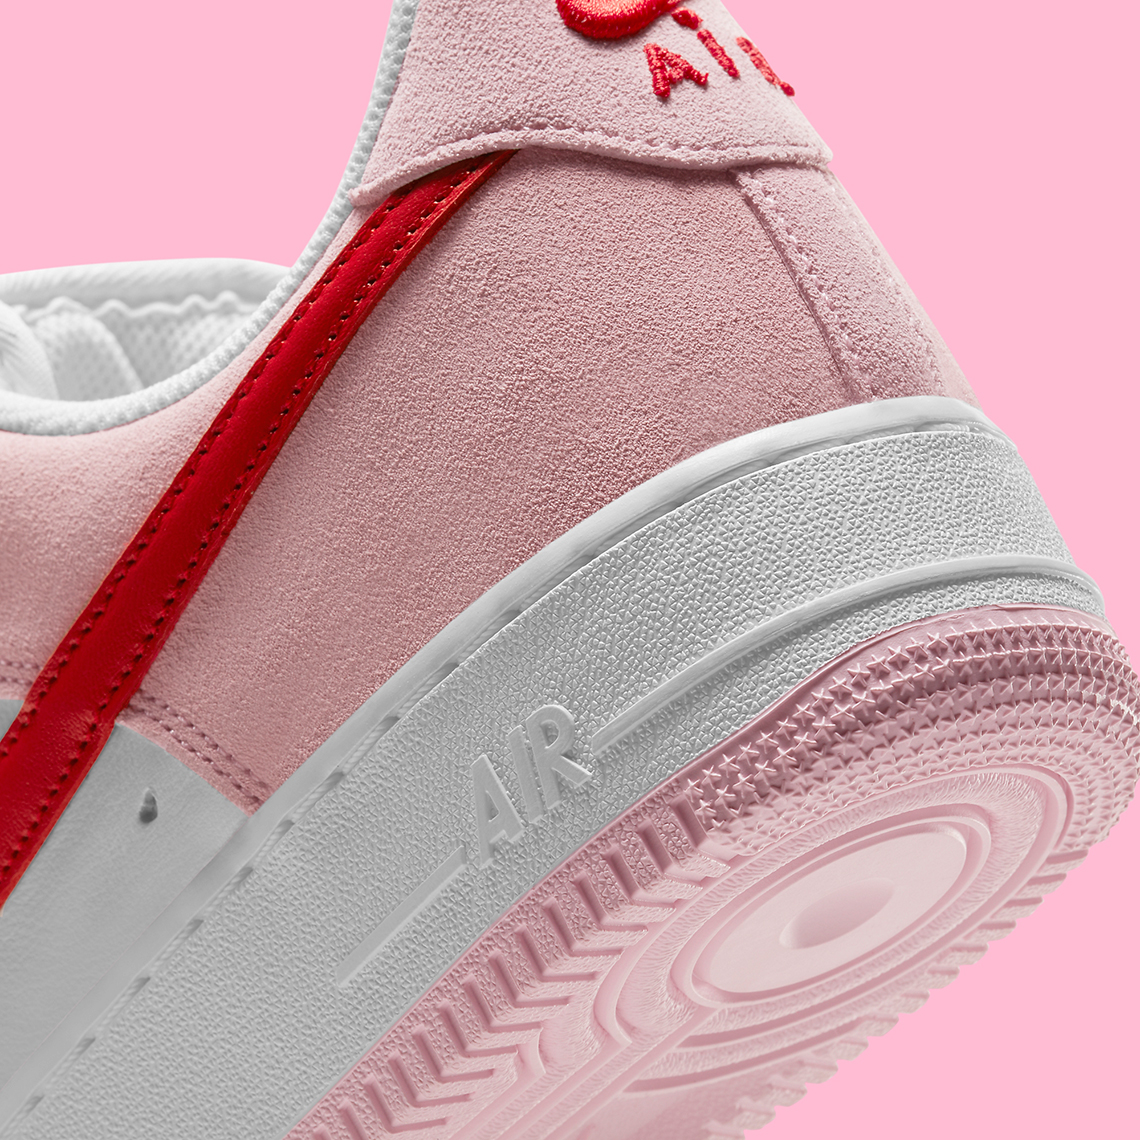 L'AMOUR PACK FOR NIKE VALENTINES